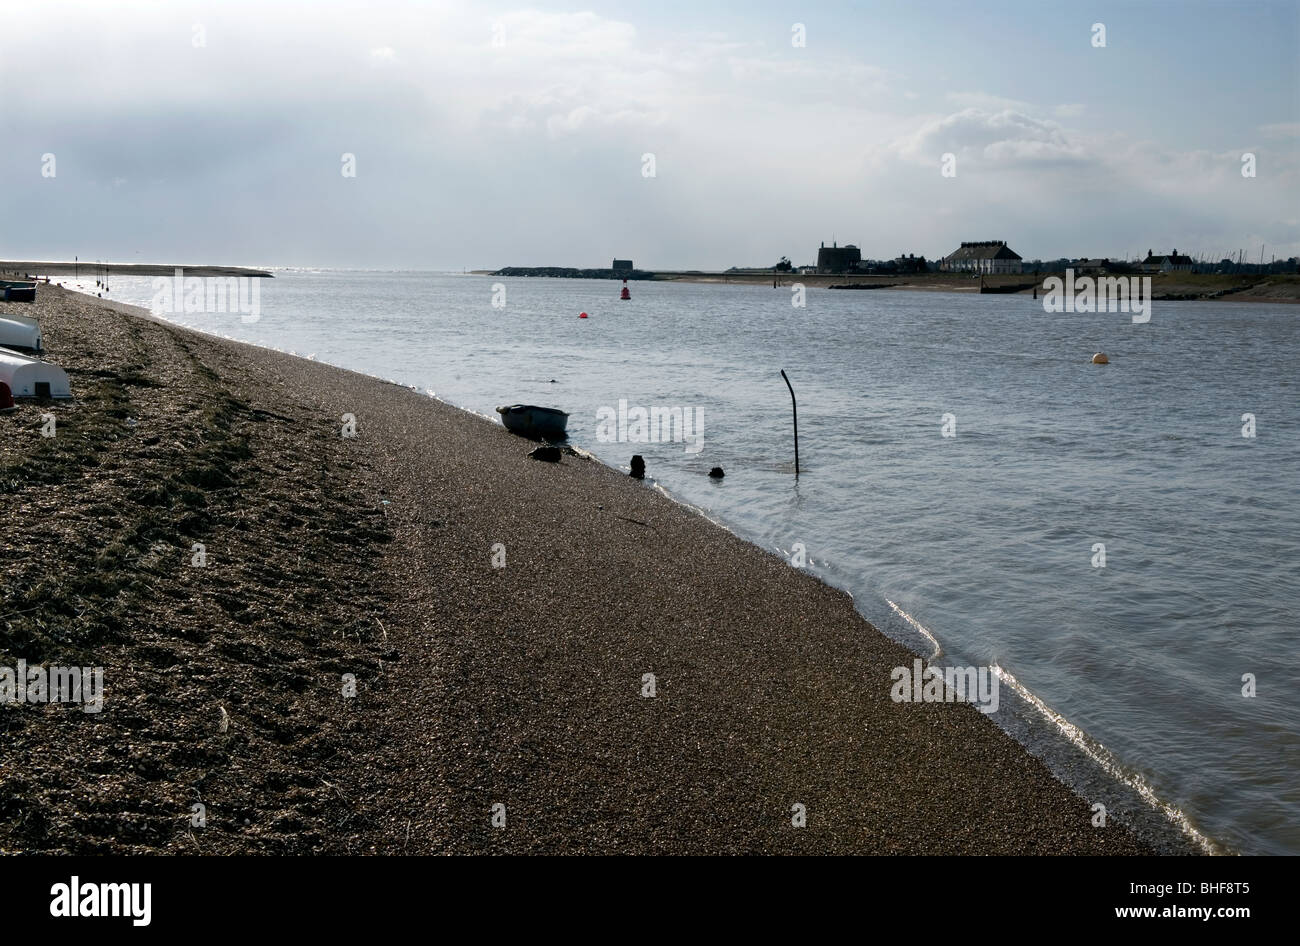 Bawdsey Quay on the River Deben looking across to Old Felixstowe, Suffolk, Britain, UK. Stock Photo